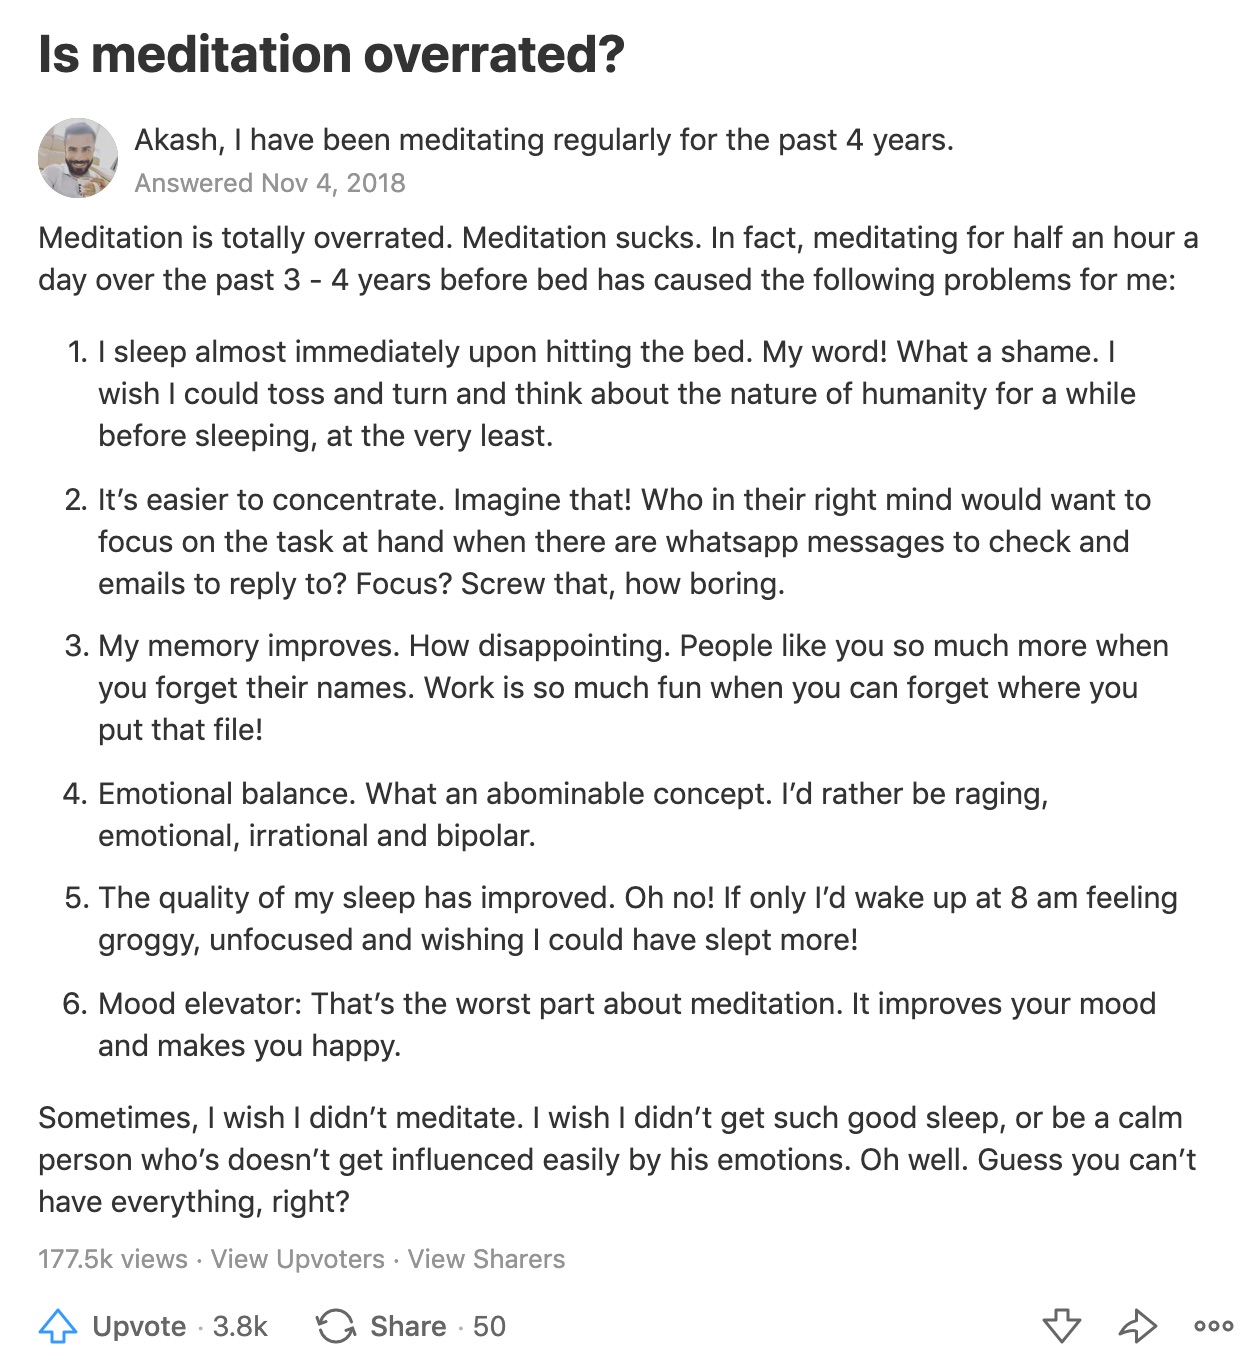 Akash s answer to Is meditation overrated Quora" srcset="https://ahrefs.com/blog/wp-content/uploads/2019/11/Akash_s_answer_to_Is_meditation_overrated__-_Quora.jpg 1252w, https://ahrefs.com/blog/wp-content/uploads/2019/11/Akash_s_answer_to_Is_meditation_overrated__-_Quora-768x834.jpg 768w, https://ahrefs.com/blog/wp-content/uploads/2019/11/Akash_s_answer_to_Is_meditation_overrated__-_Quora-391x425.jpg 391w" sizes="(max-width: 1252px) 100vw, 1252px